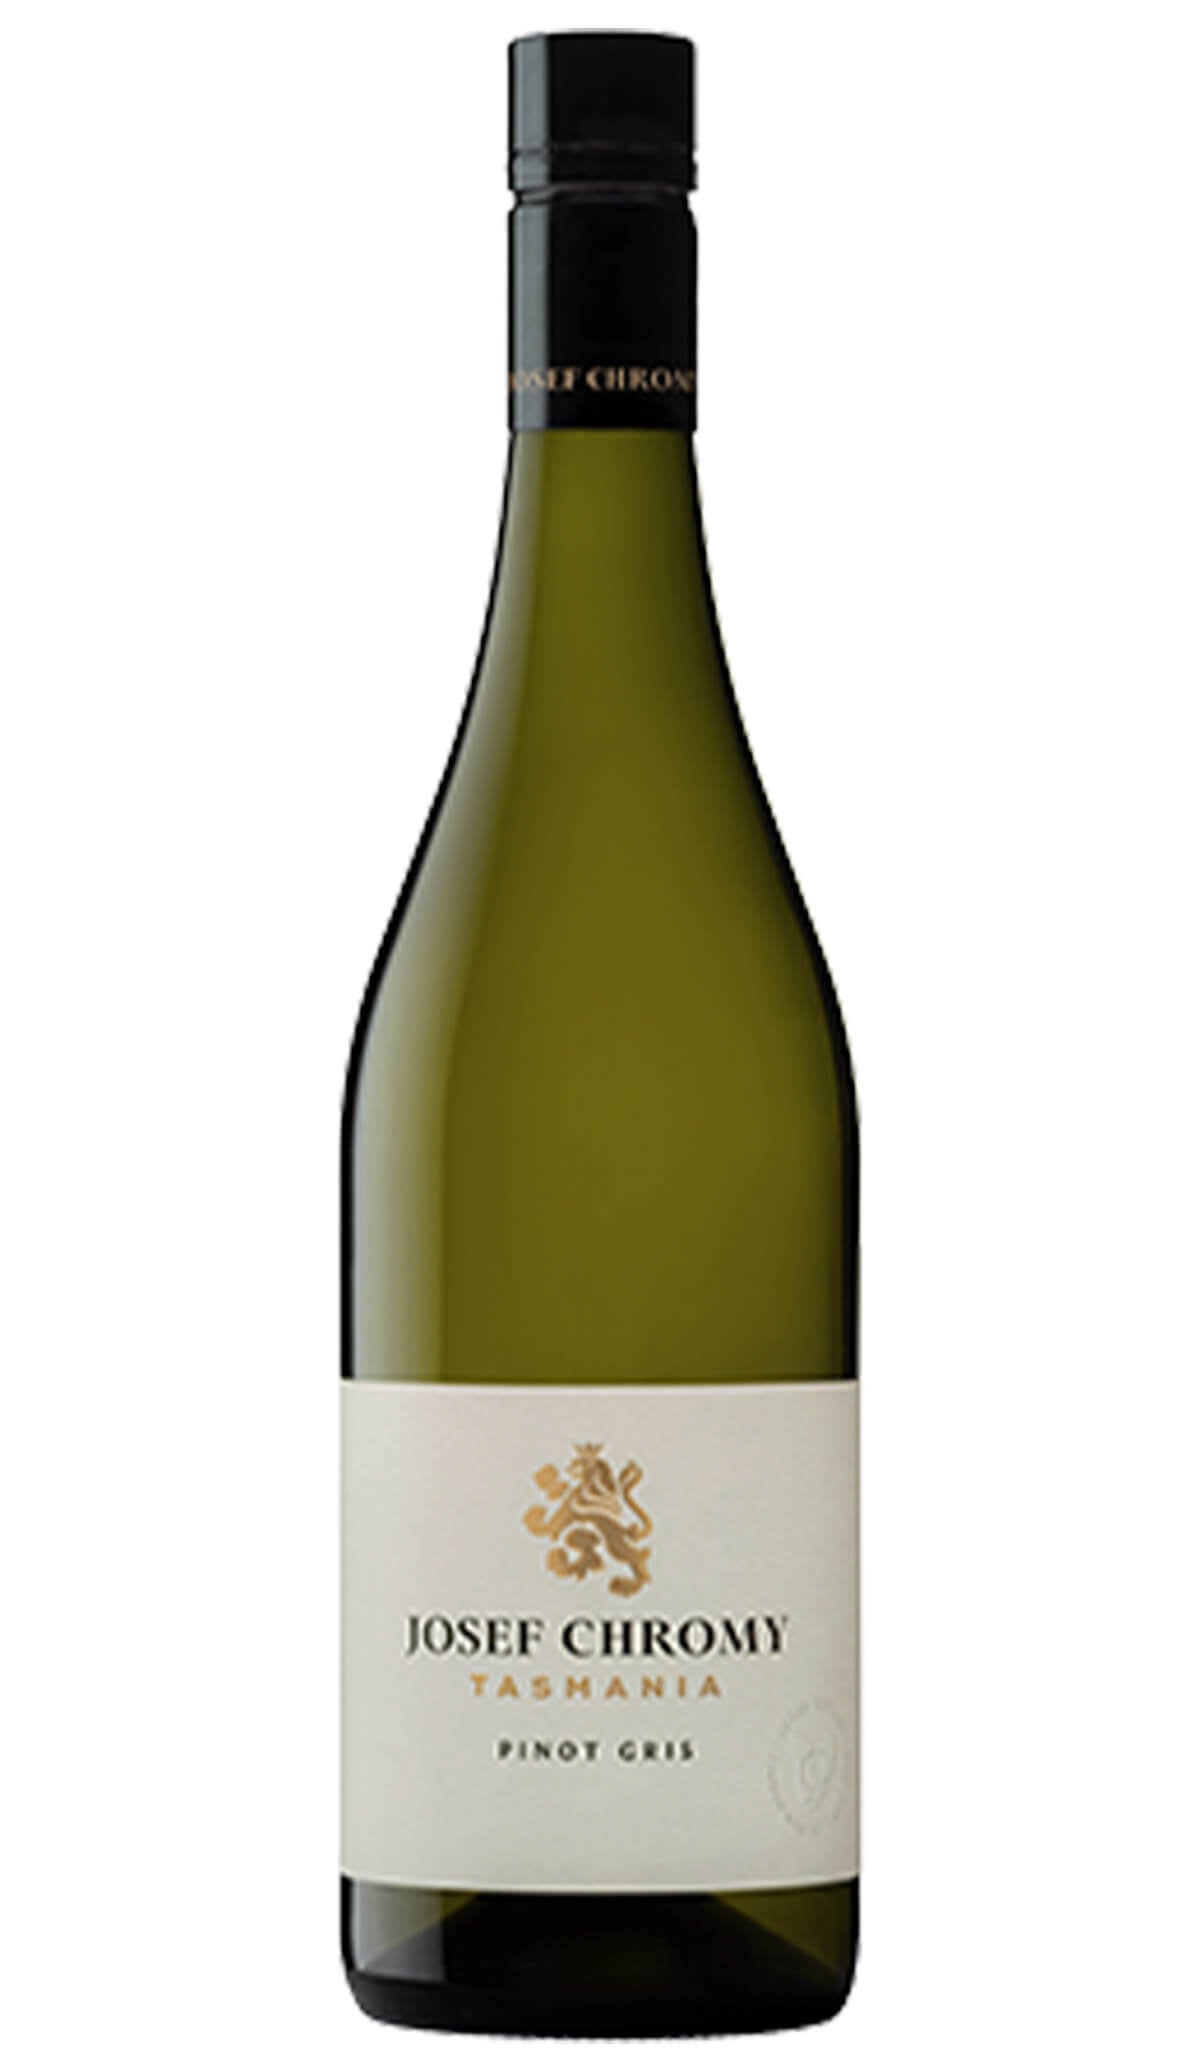 Find out more or buy Josef Chromy Pinot Gris 2023 (Tasmania) online at Wine Sellers Direct - Australia’s independent liquor specialists.